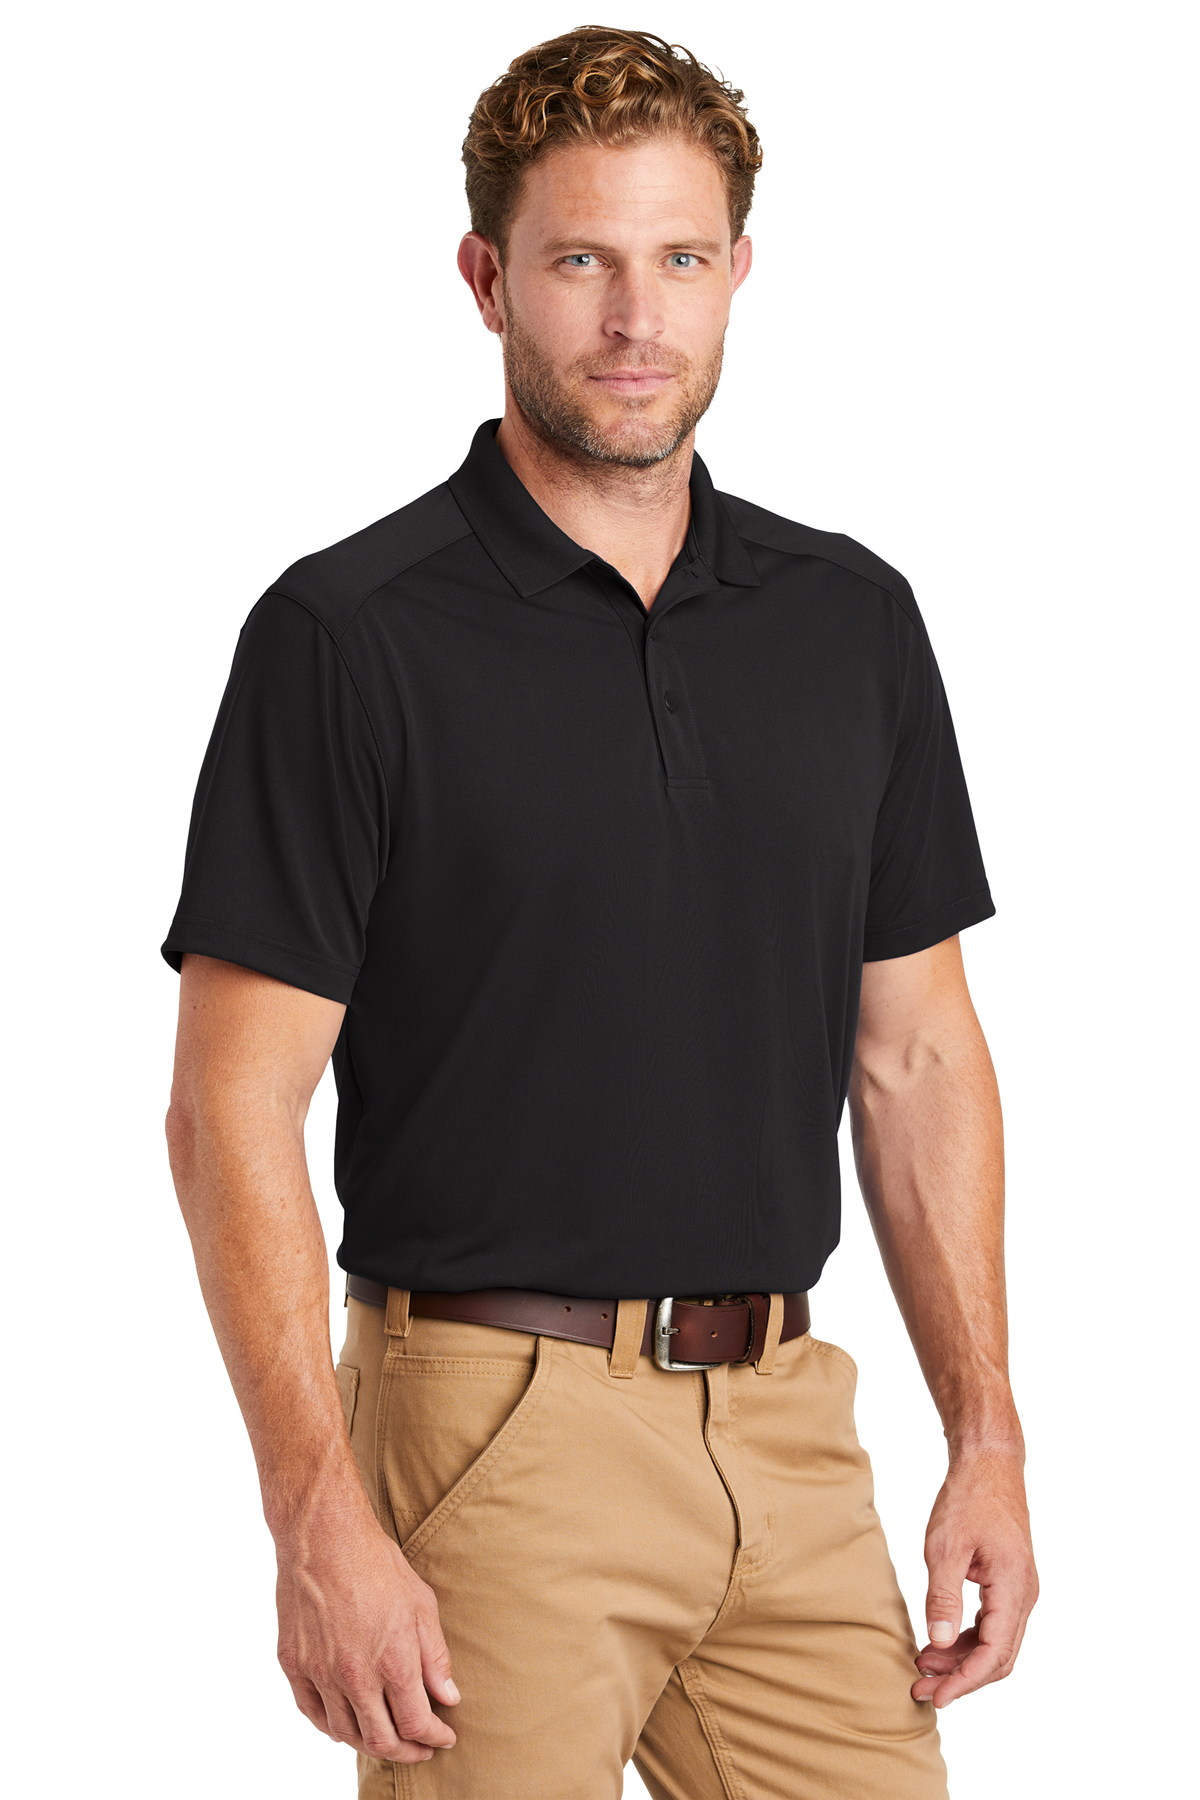 CornerStone ® Select Lightweight Snag-Proof Polo | Product | Company ...